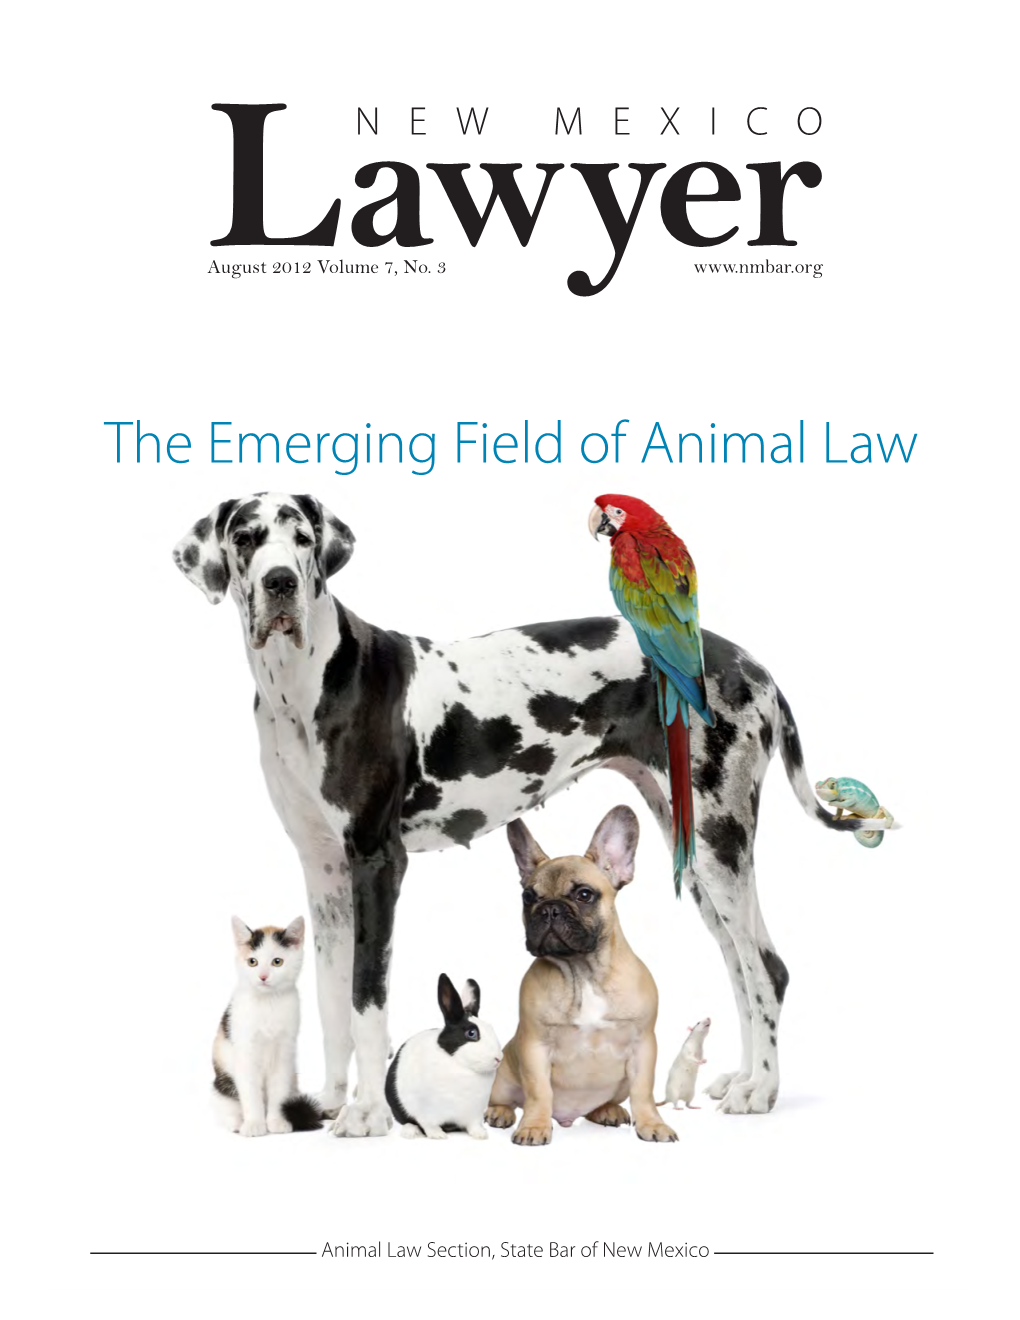 The Emerging Field of Animal Law